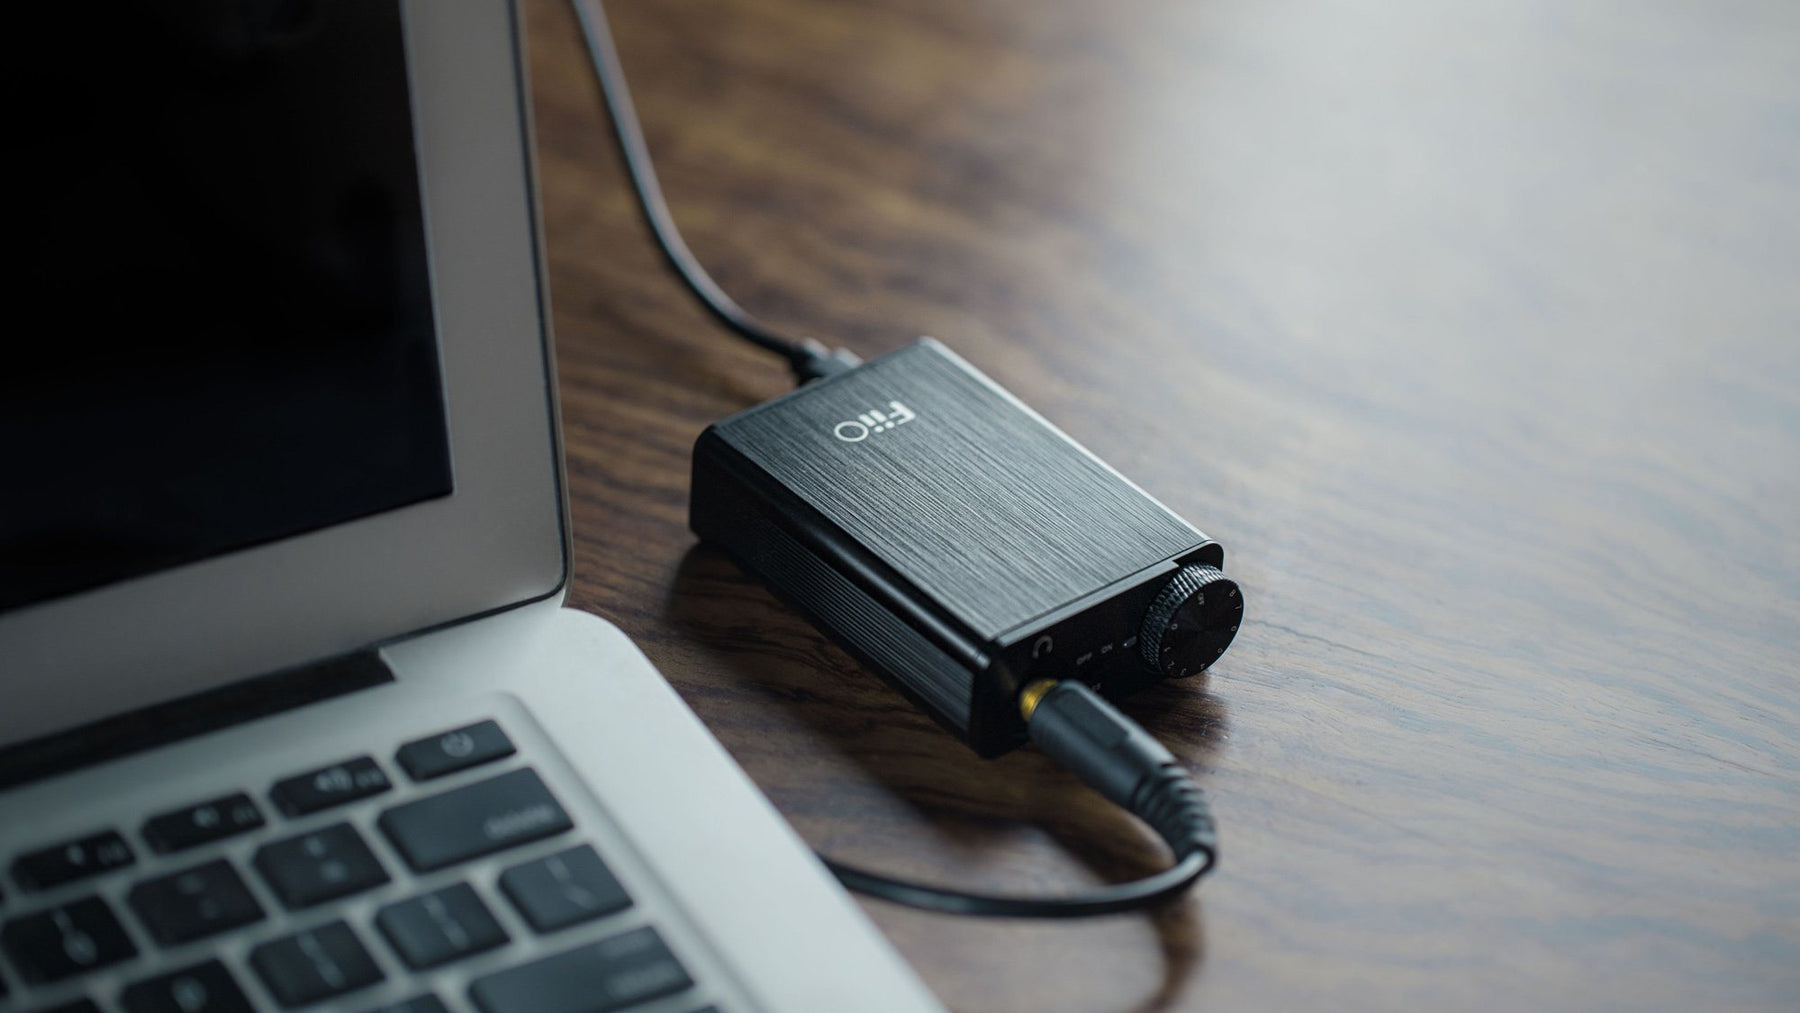 FiiO E10K Type-C: Latest Affordable USB DAC/AMP With Type-C Connector